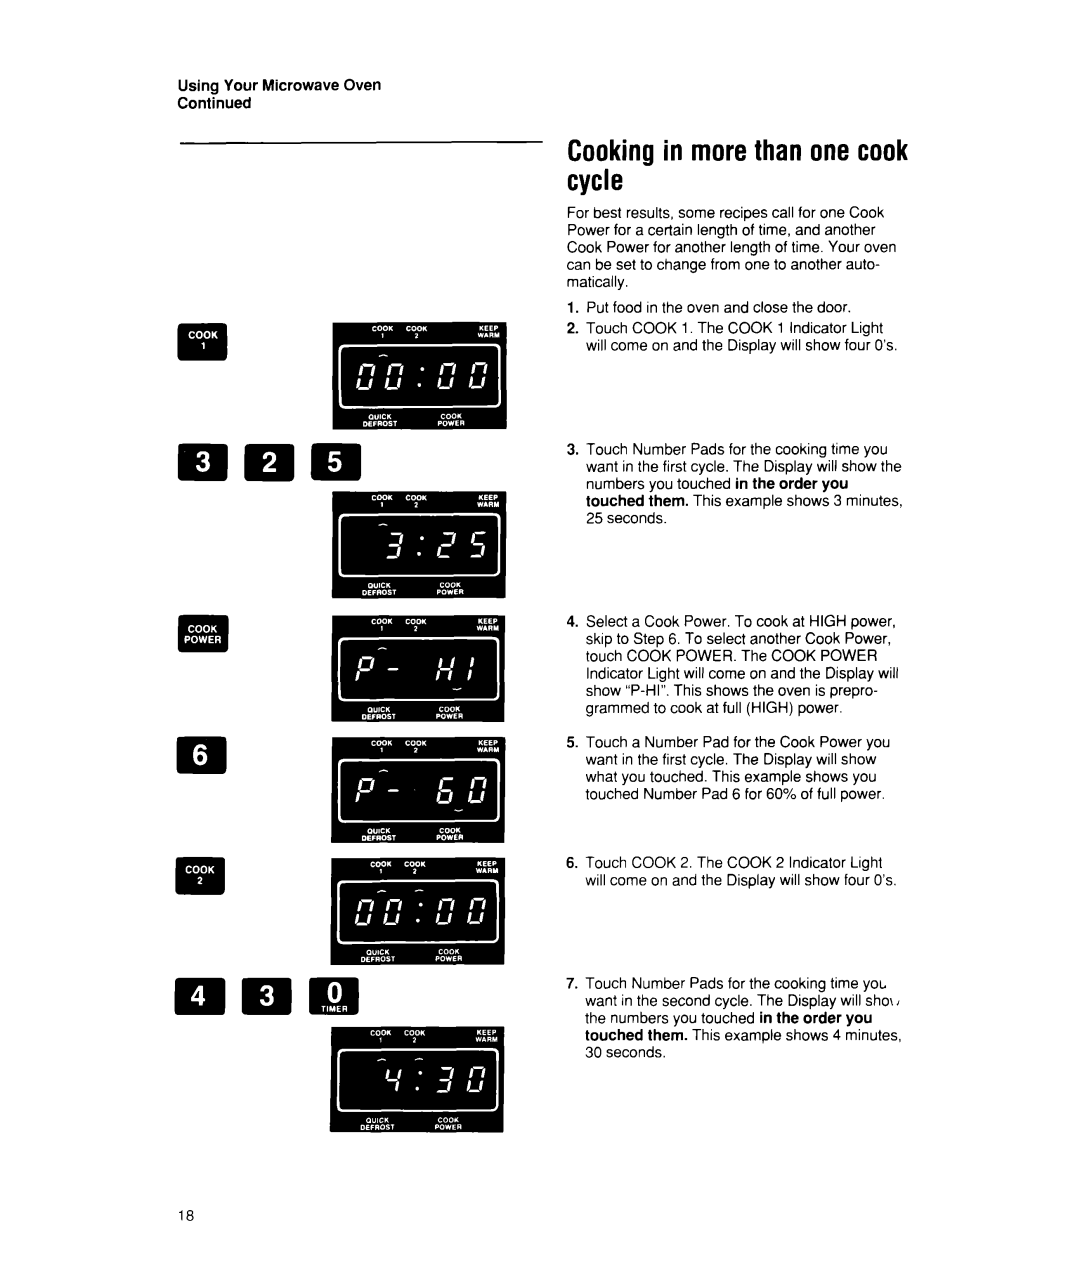 Whirlpool MW7400XW manual Cooking in more than one cook cycle 